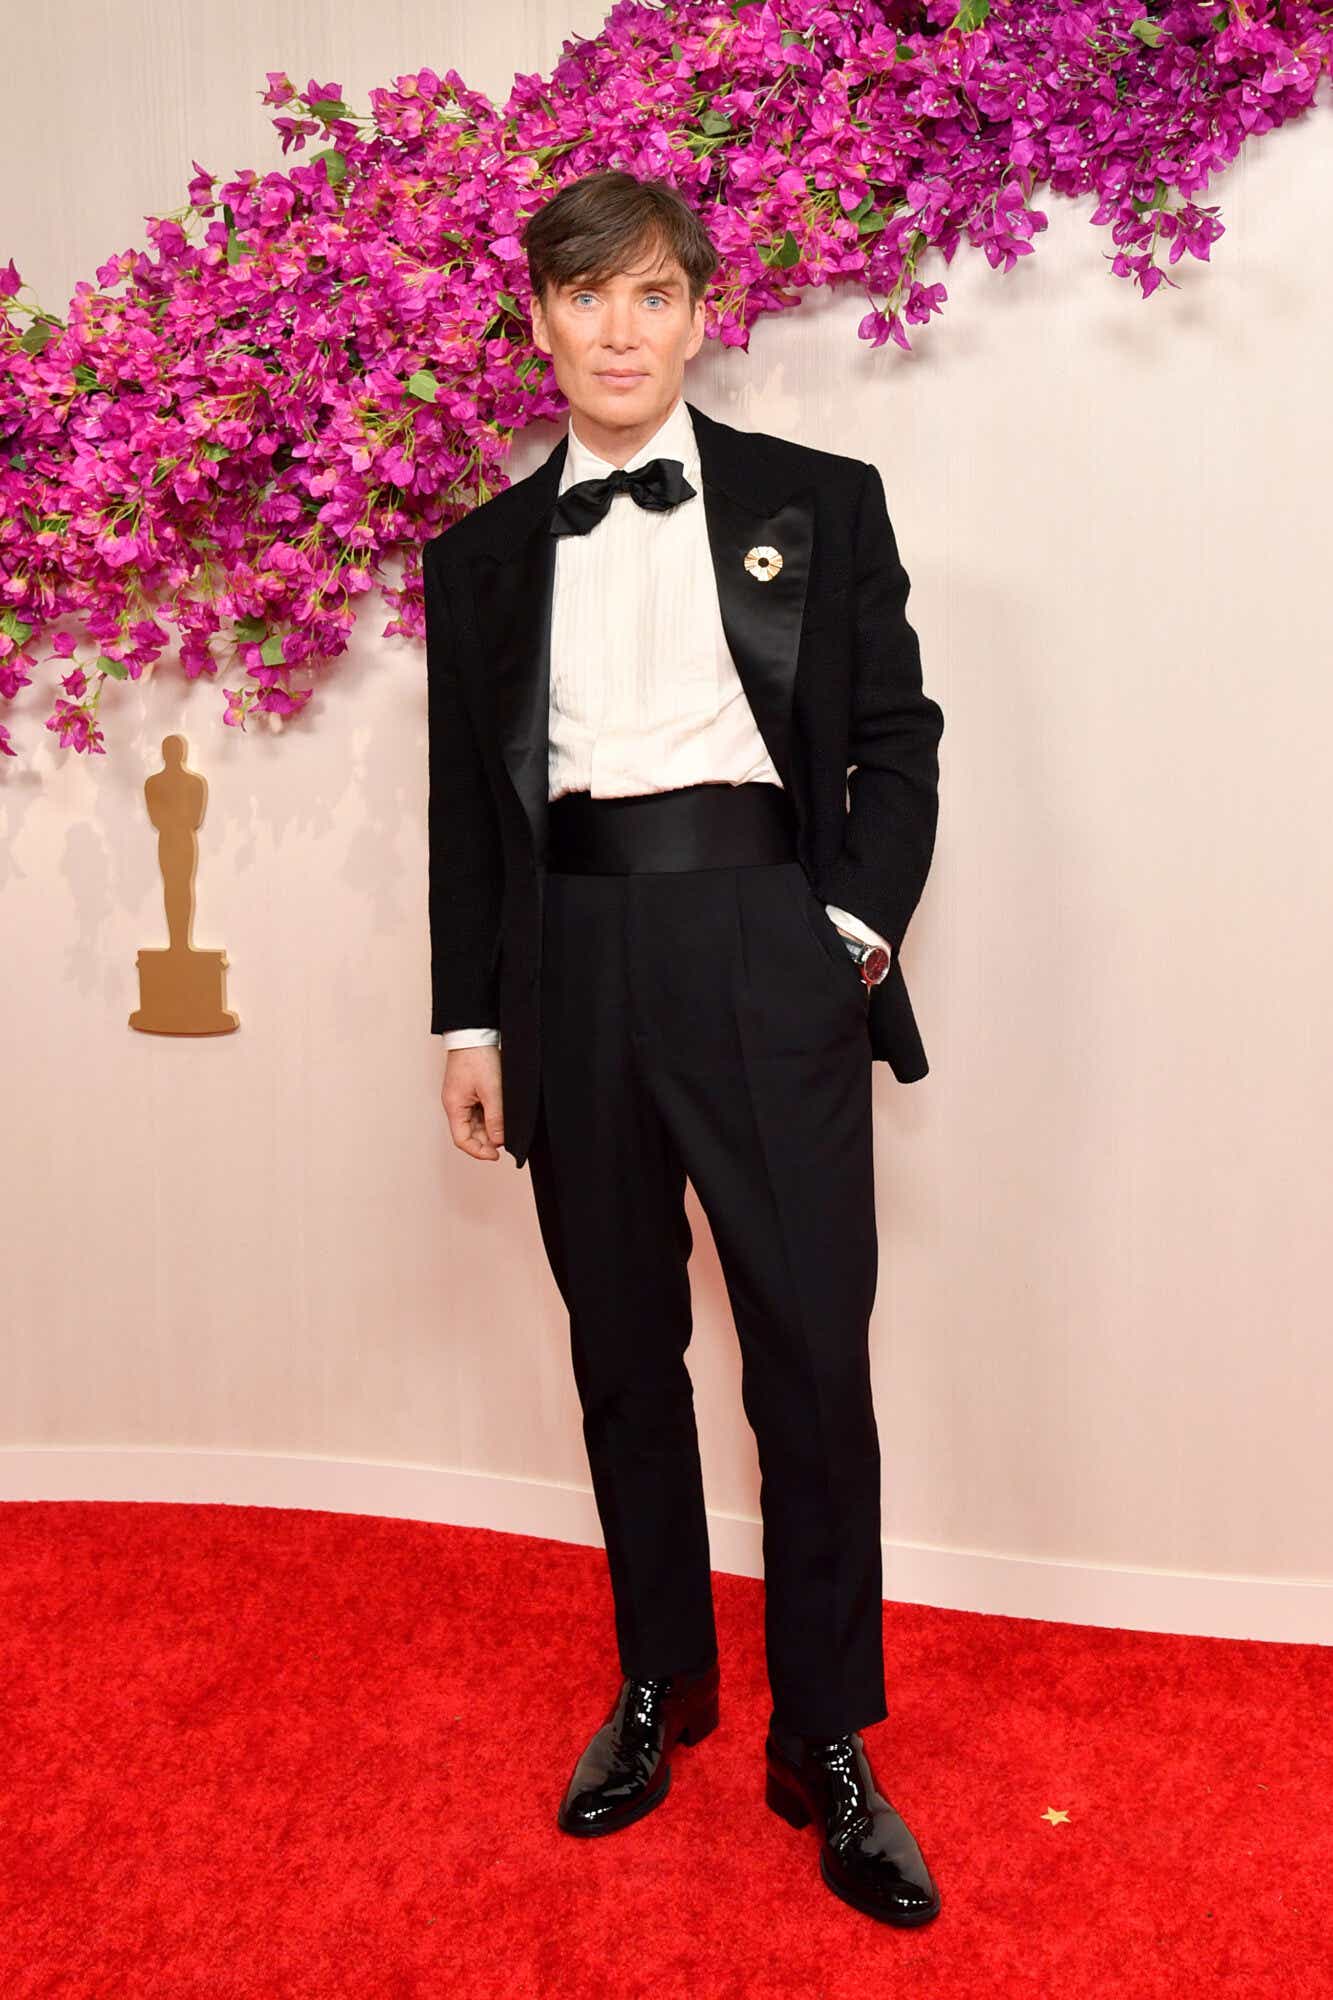 Cillian Murphy wears a black tuxedo with a black bowtie to the Oscars. On his lapel is a gold circular pin. 